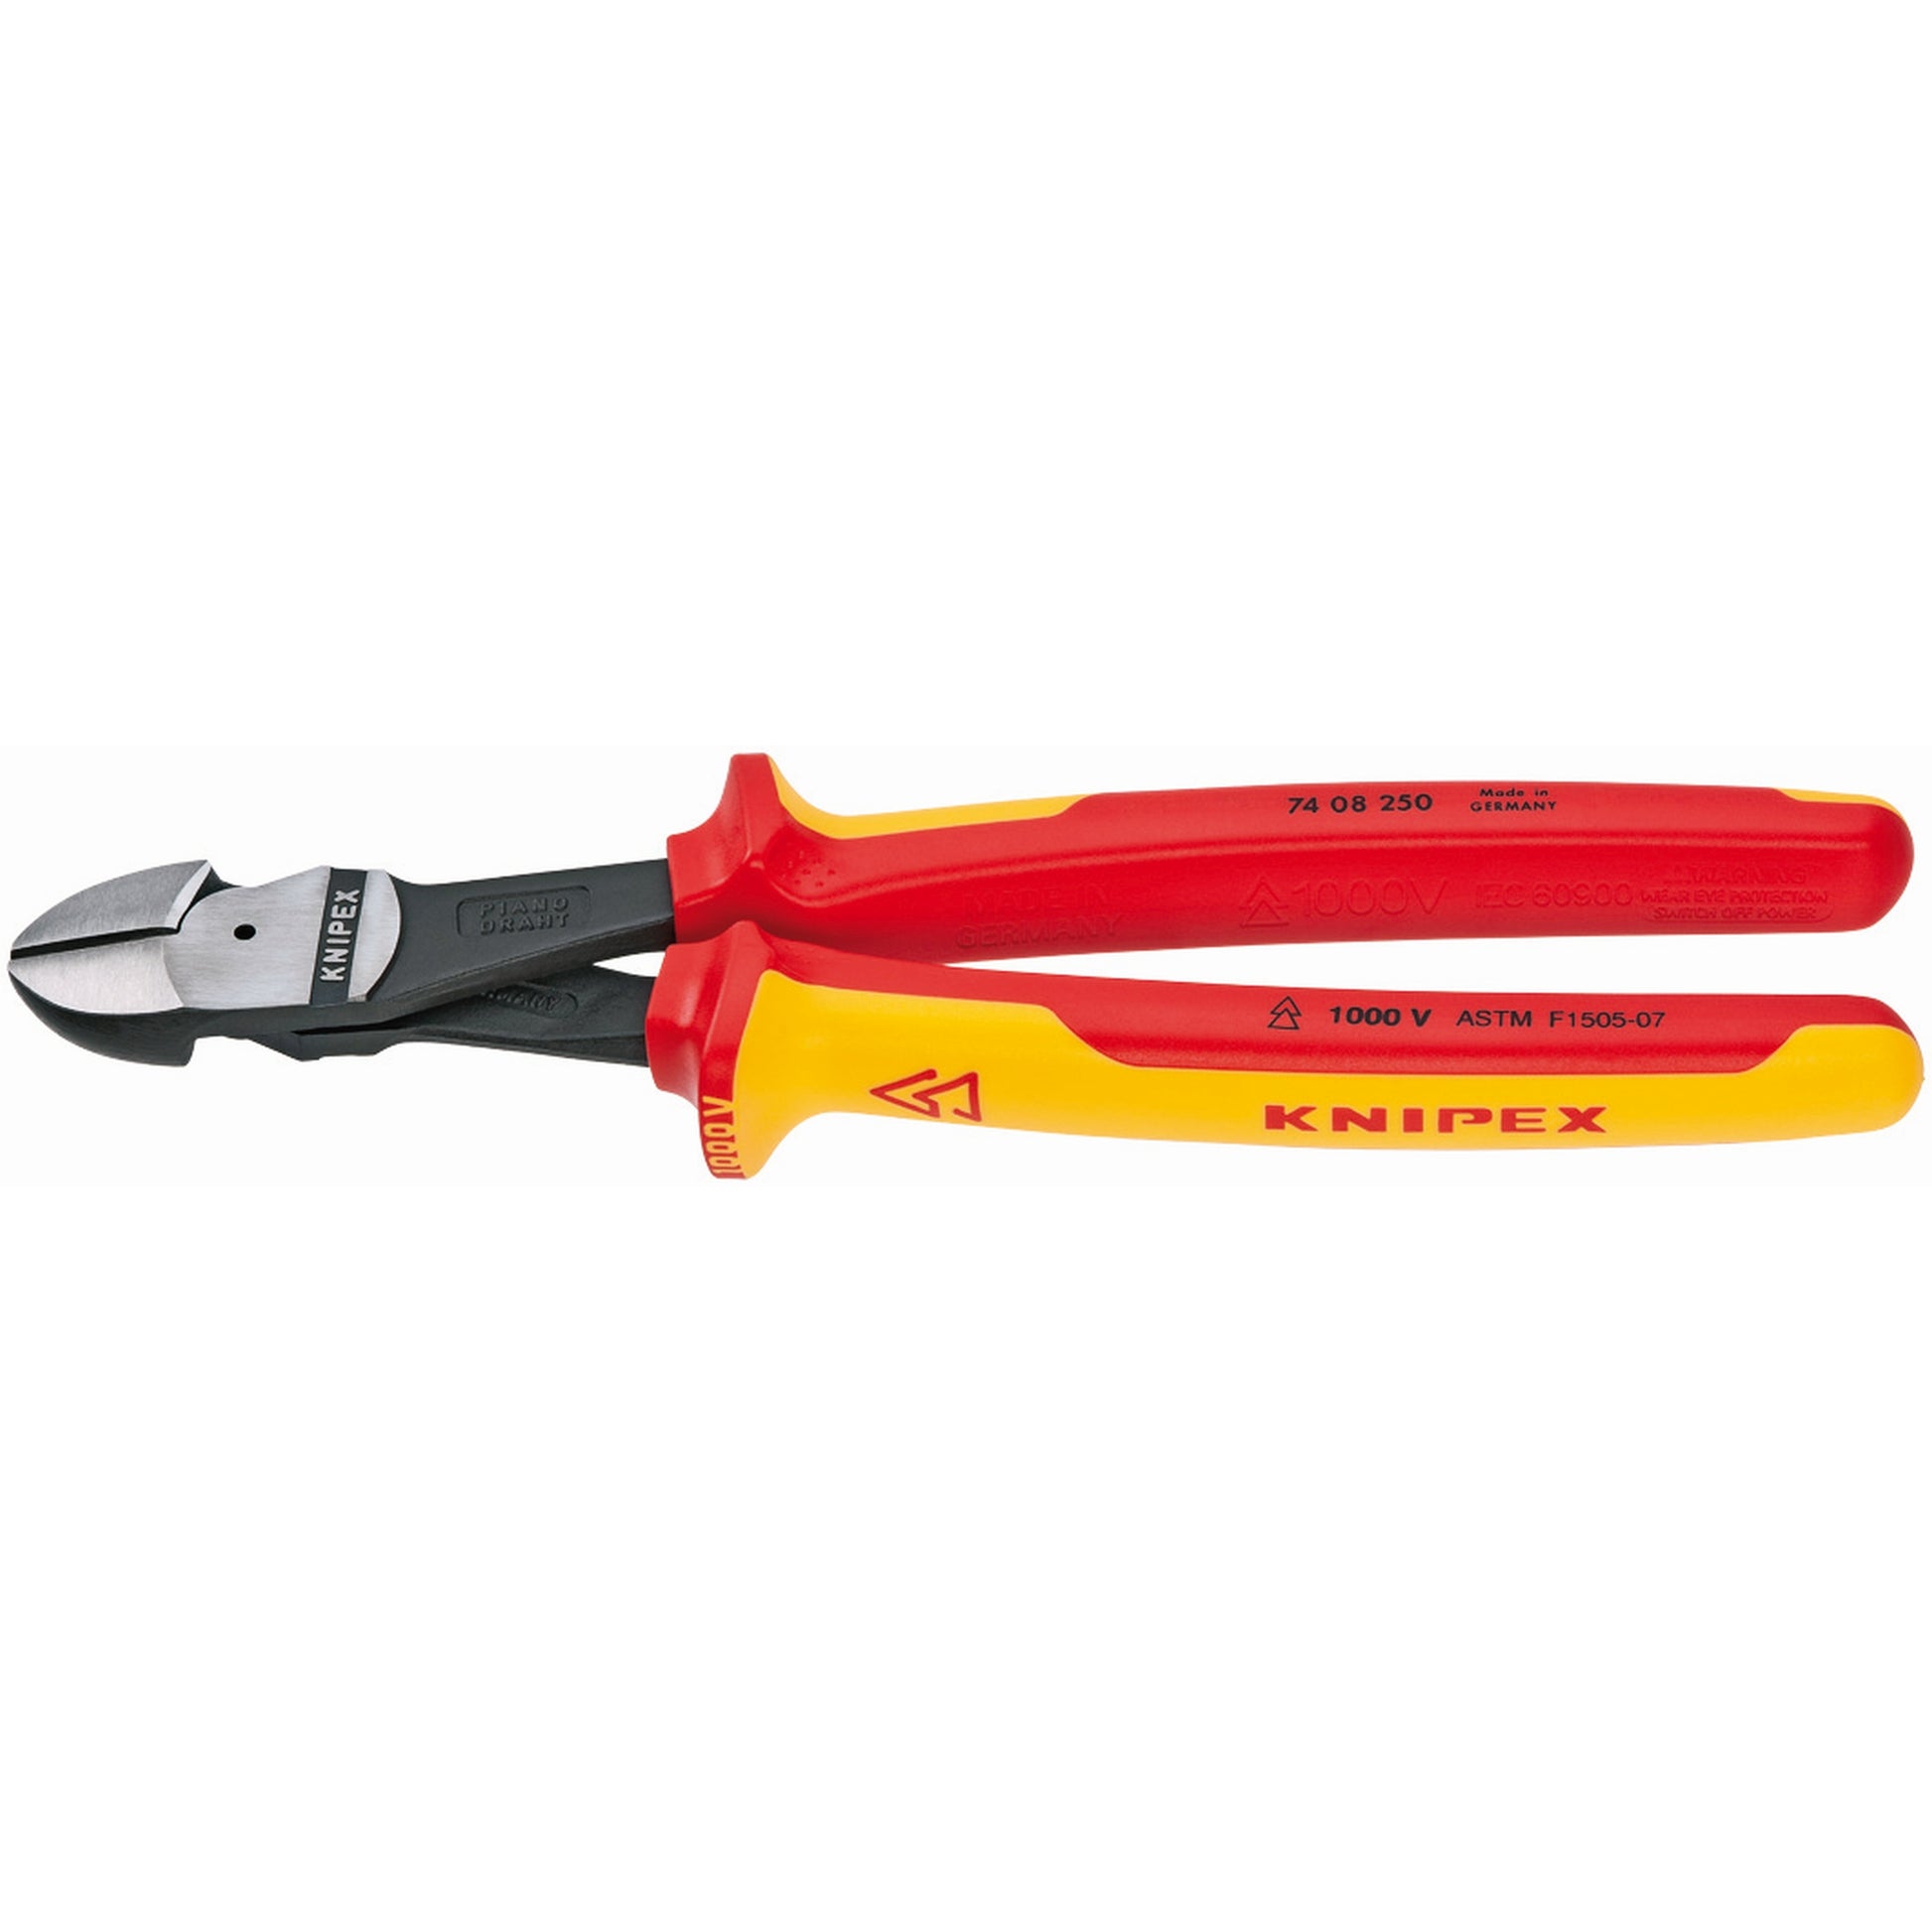 knipex high leverage diagonal cutters 1000v insulated 10" 74 08 250 us